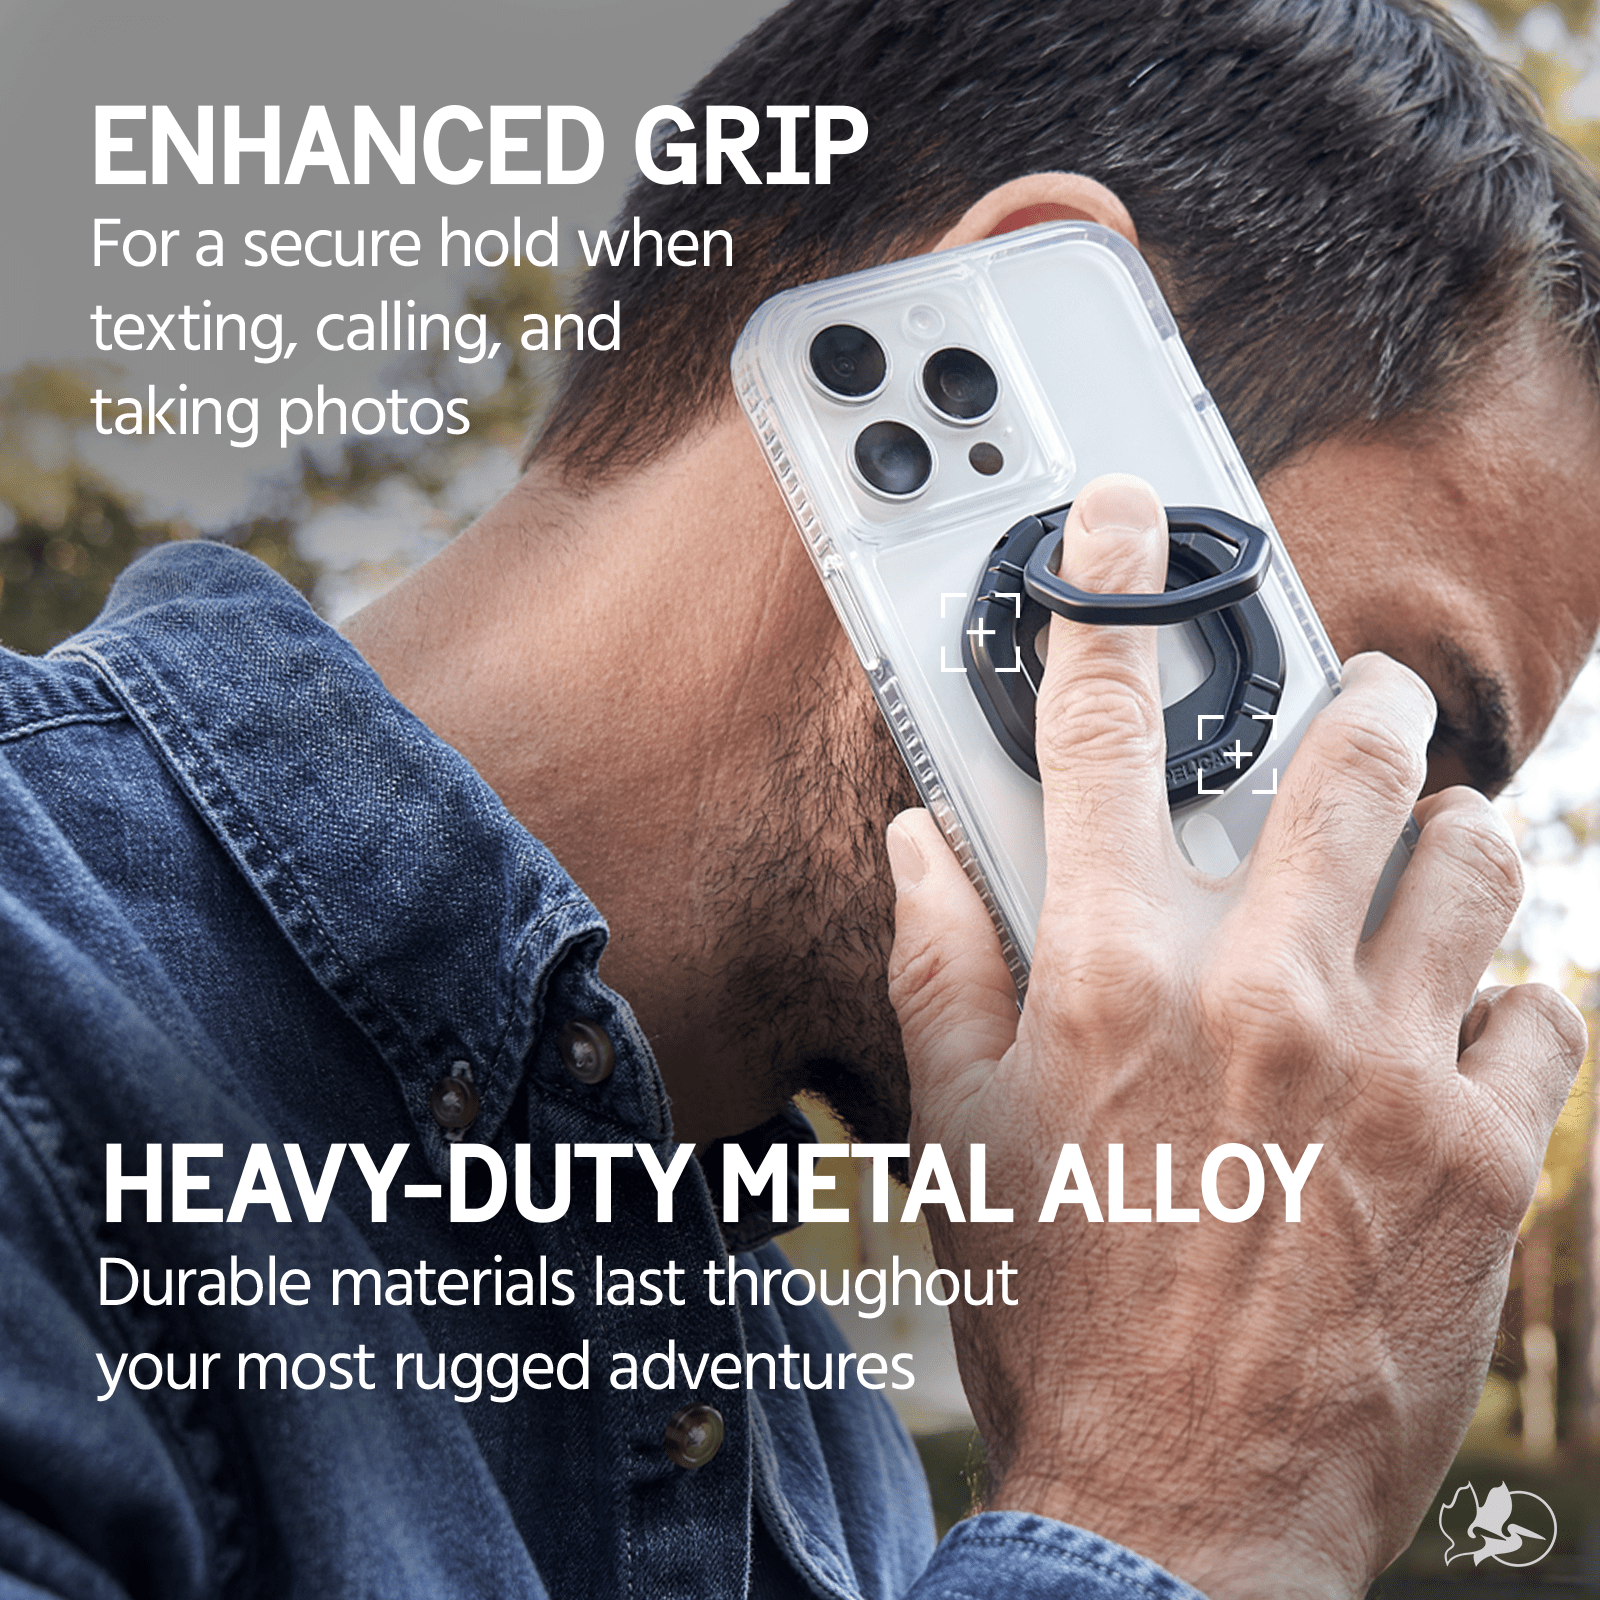 ENHANCED GRIP FOR A SECURE HOLD WHEN TEXTING, CALLING AND TAKING PHOTOS. HEAVY-DUTY METAL ALLOY. DURABLE MATERIALS LAST THROUGHOUT YOUR MOST RUGGED ADVENTURES